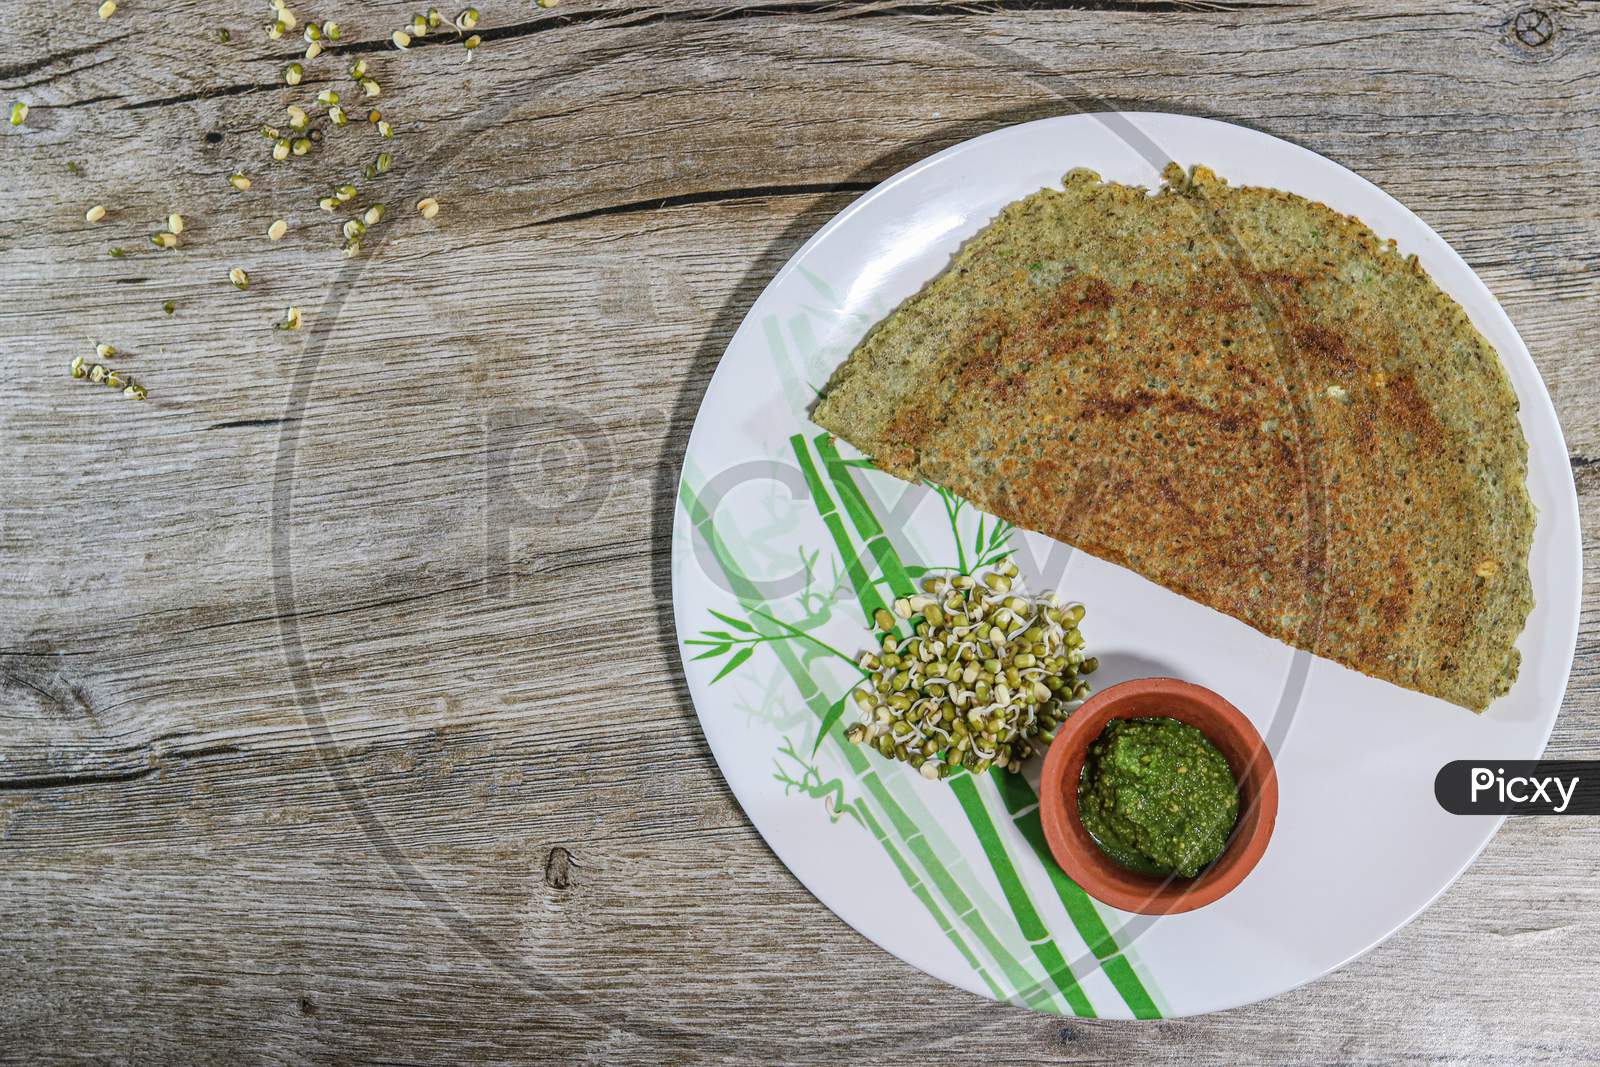 South Indian Dosa Recipe Serving